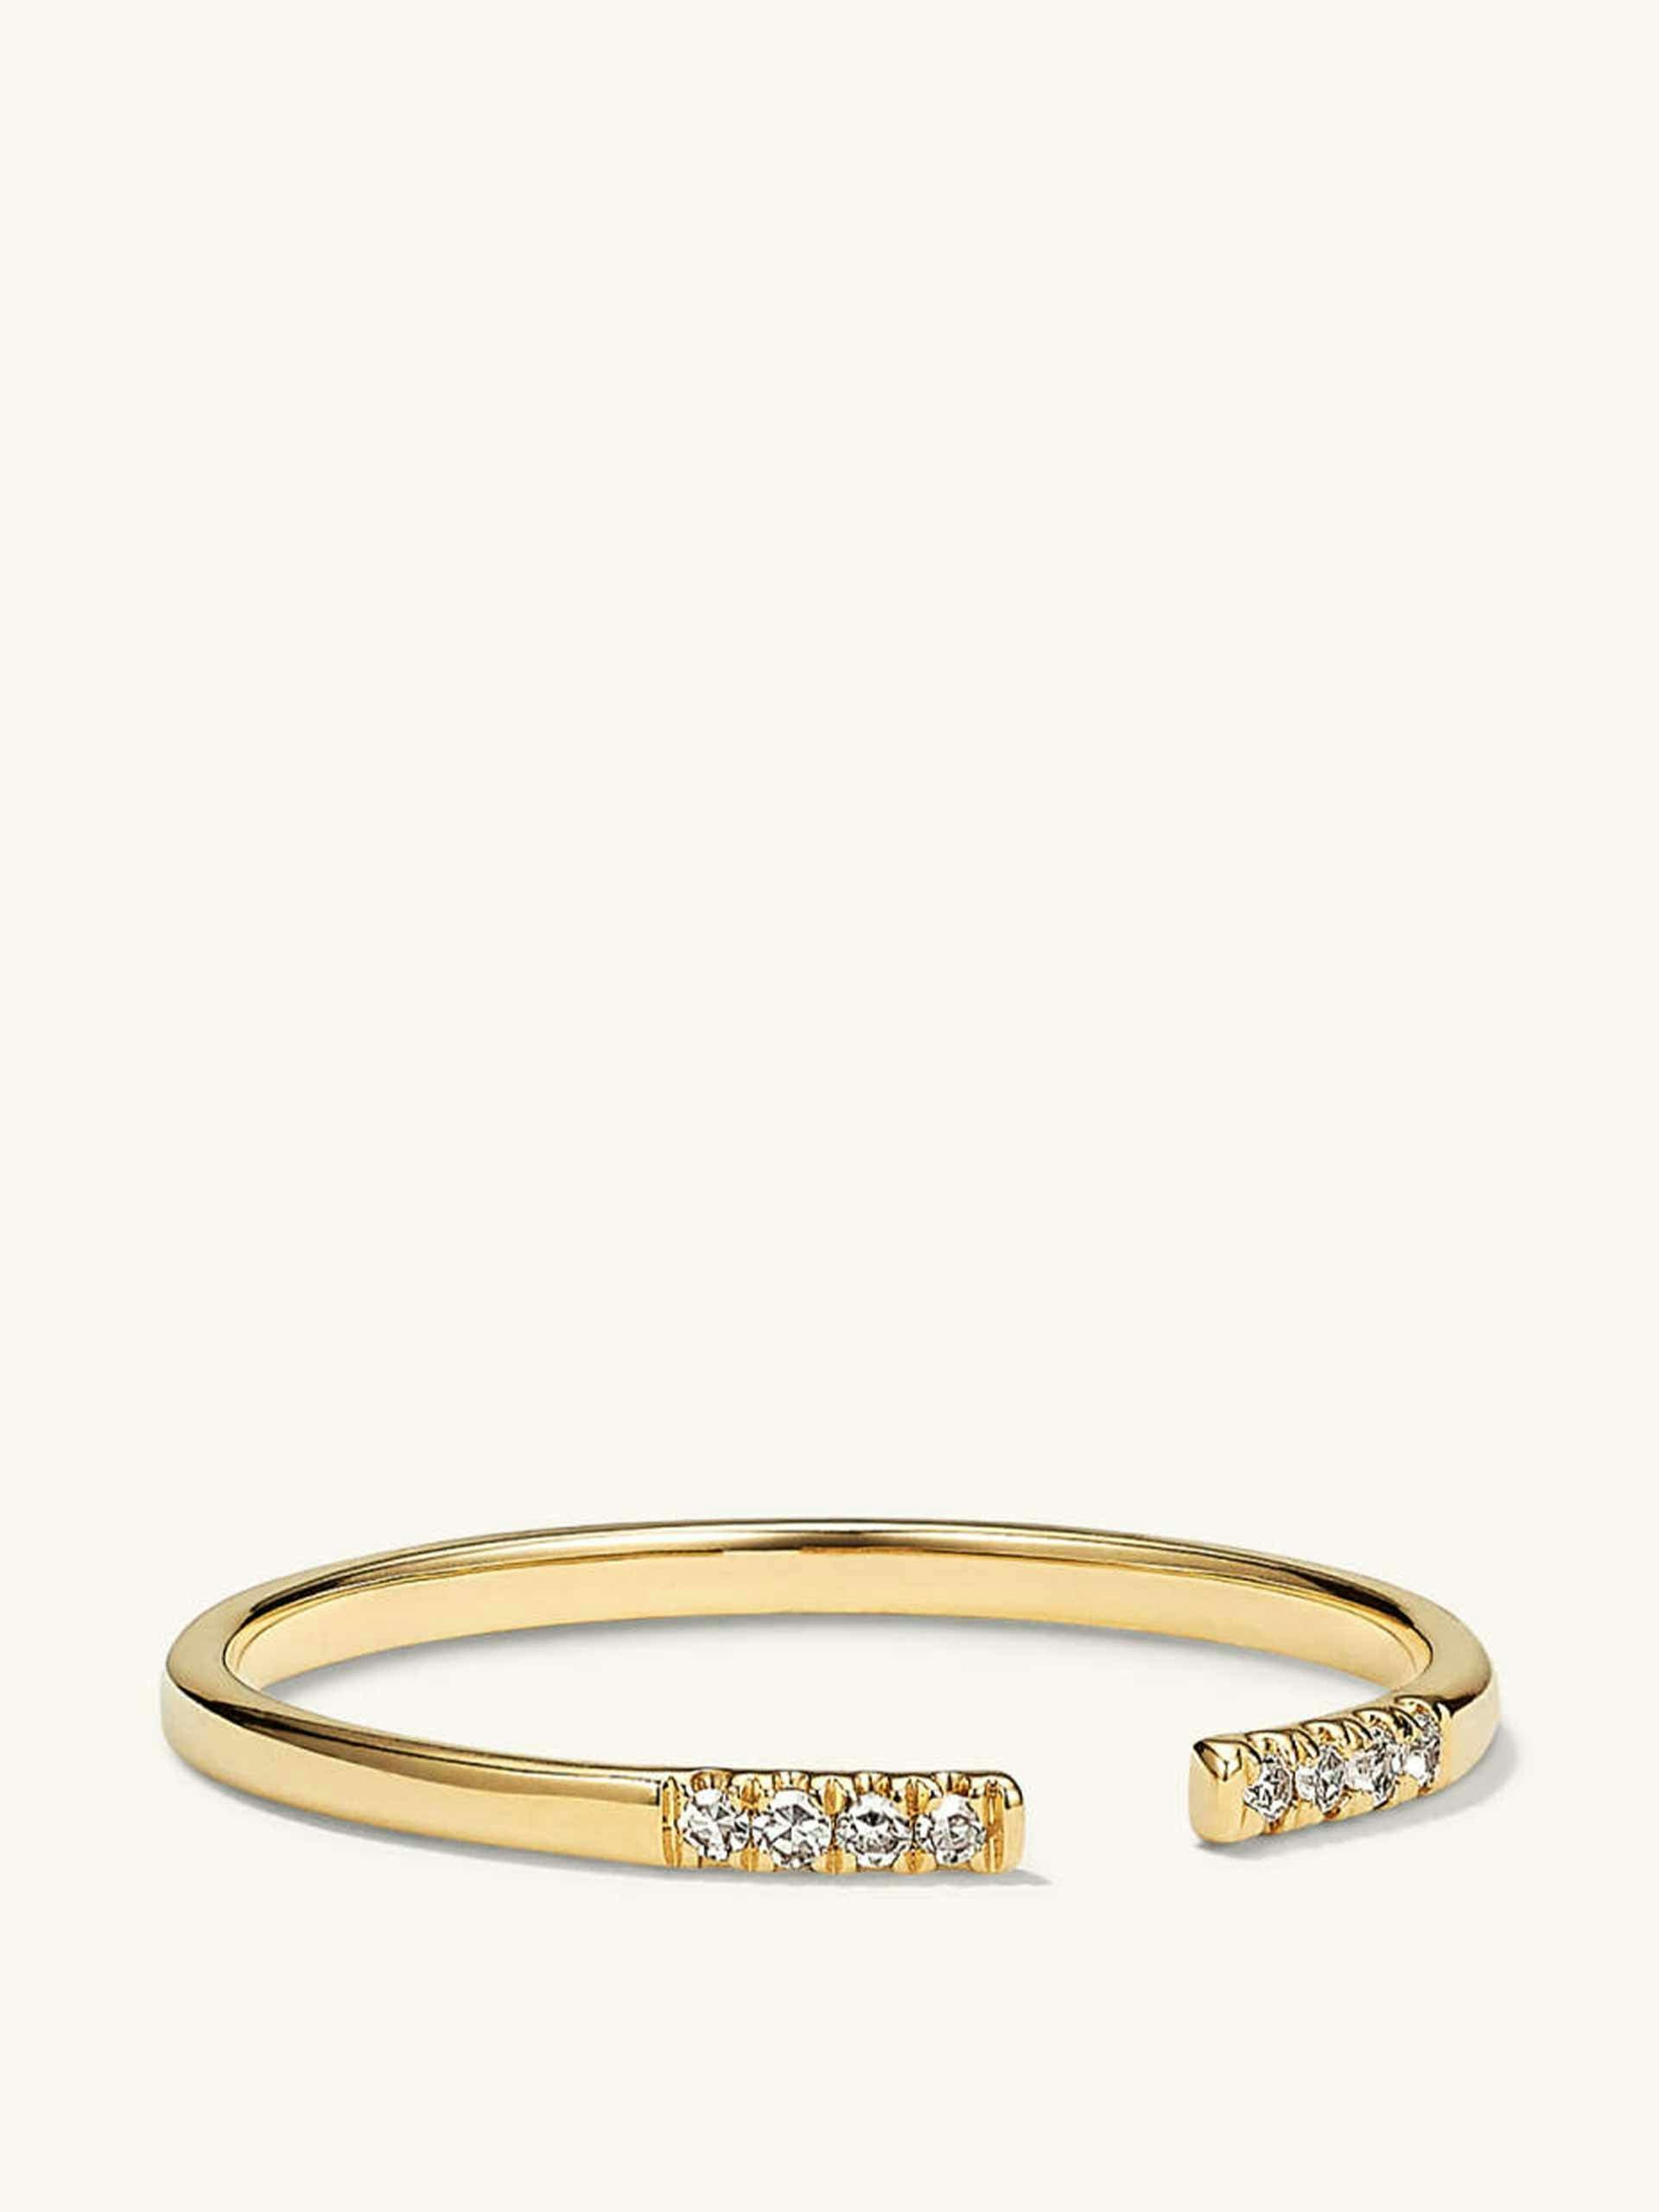 14kt yellow gold and diamond ring